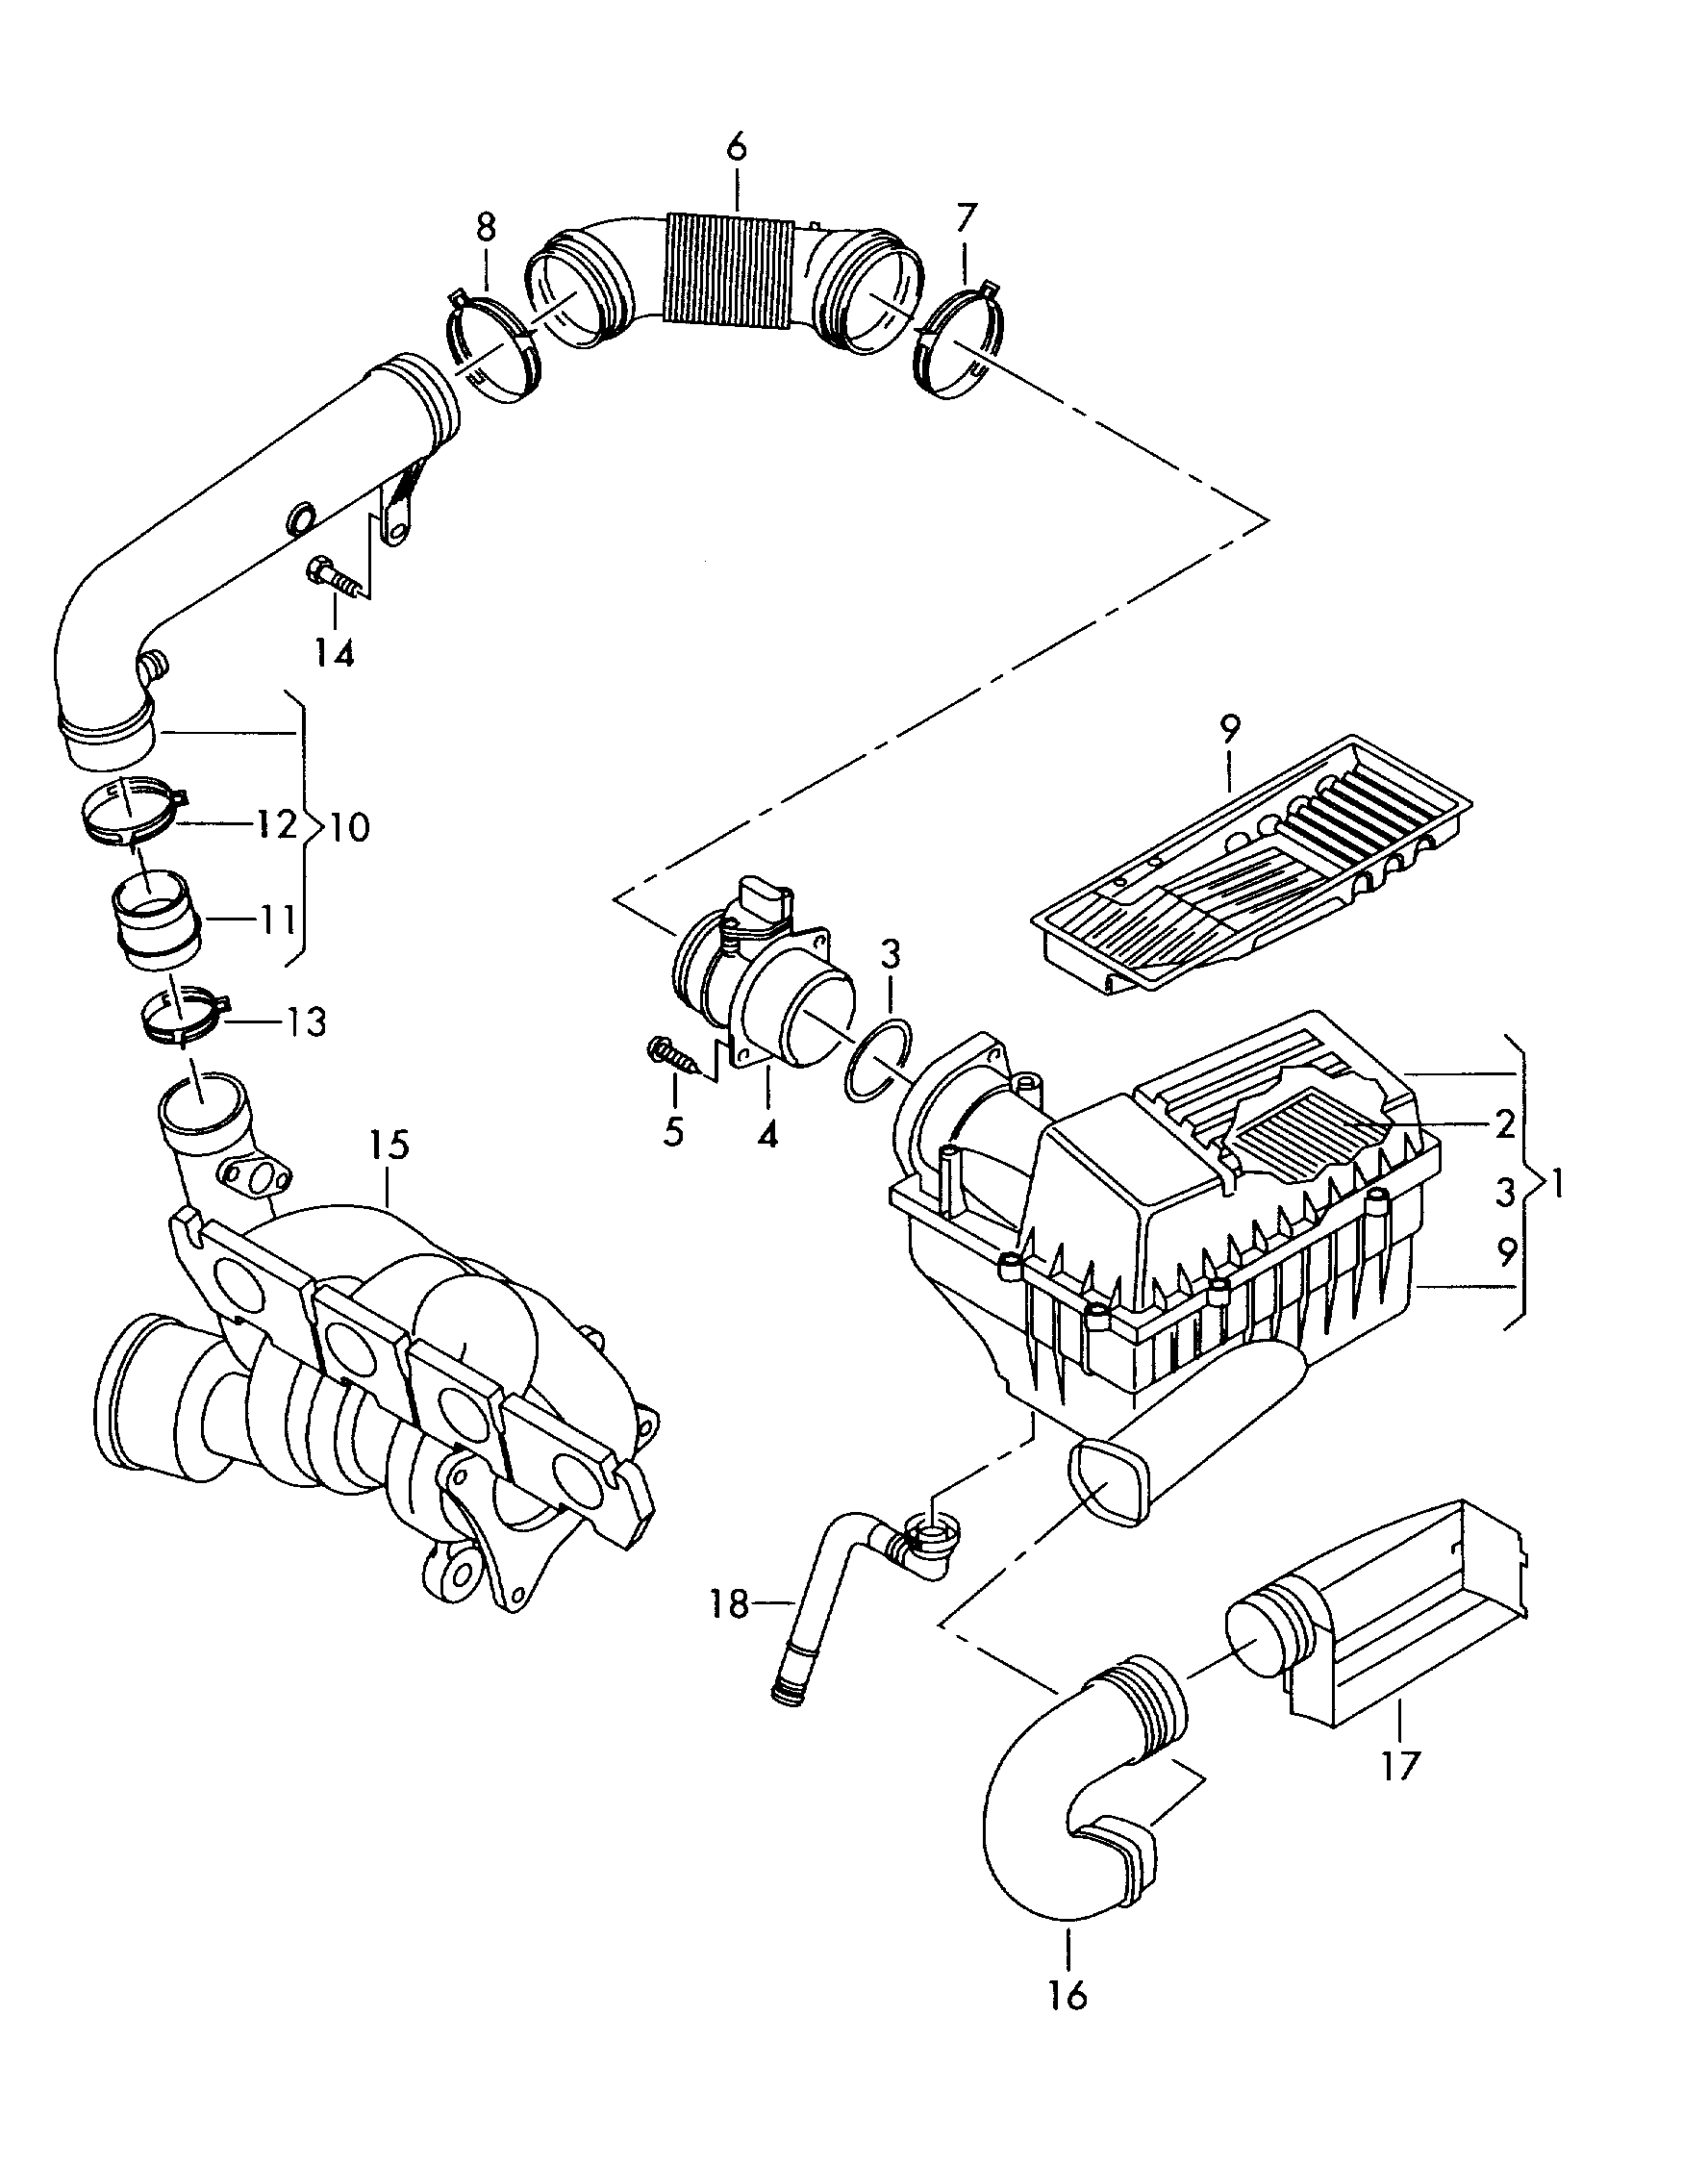 Air filter with connecting<br>parts 2.0 Ltr. - Jetta - je